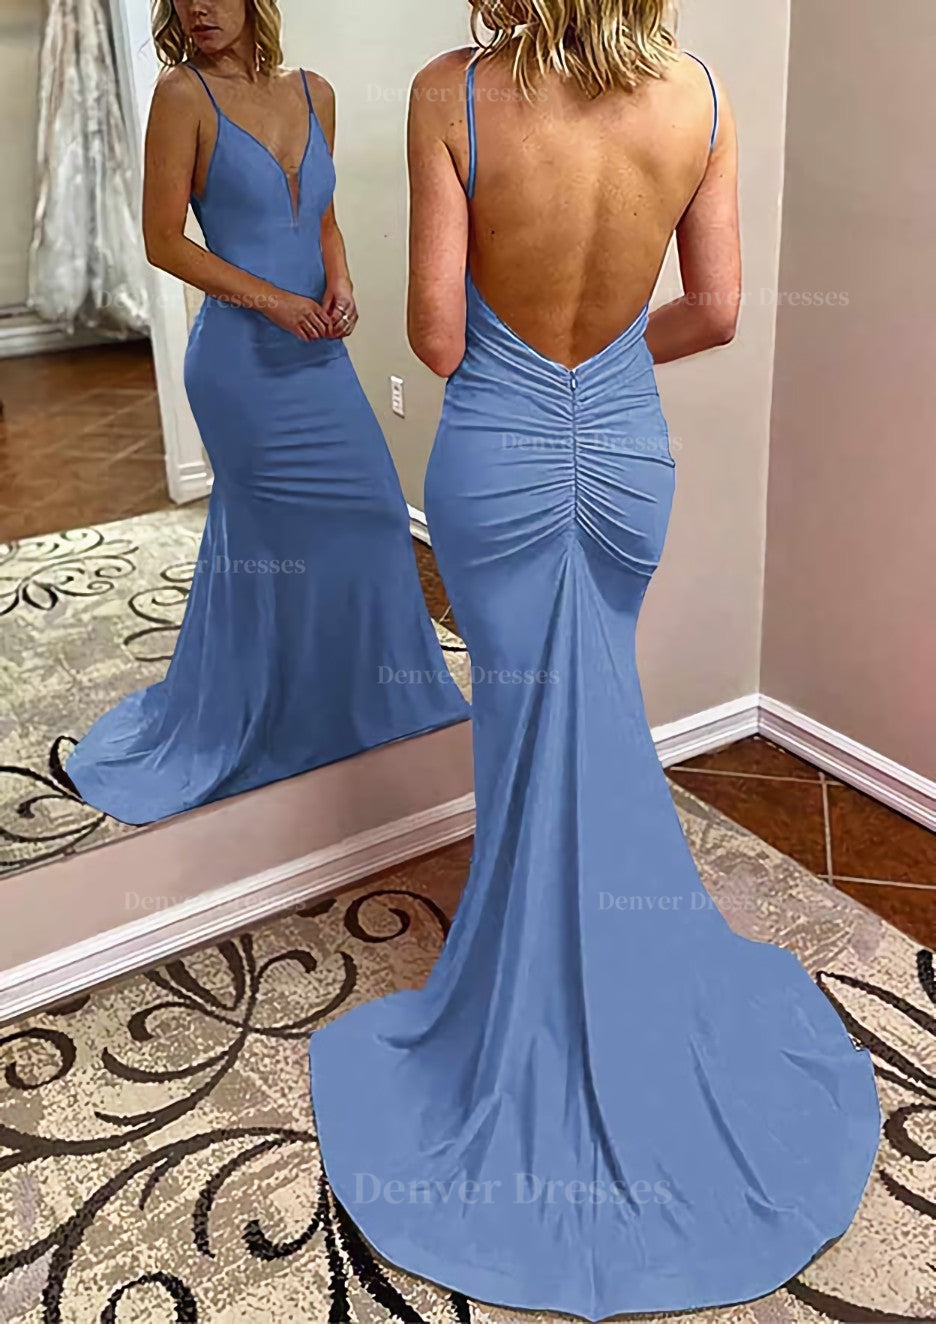 Prom Dresses Blue Light, Trumpet/Mermaid V Neck Spaghetti Straps Court Train Jersey Prom Dress With Pleated